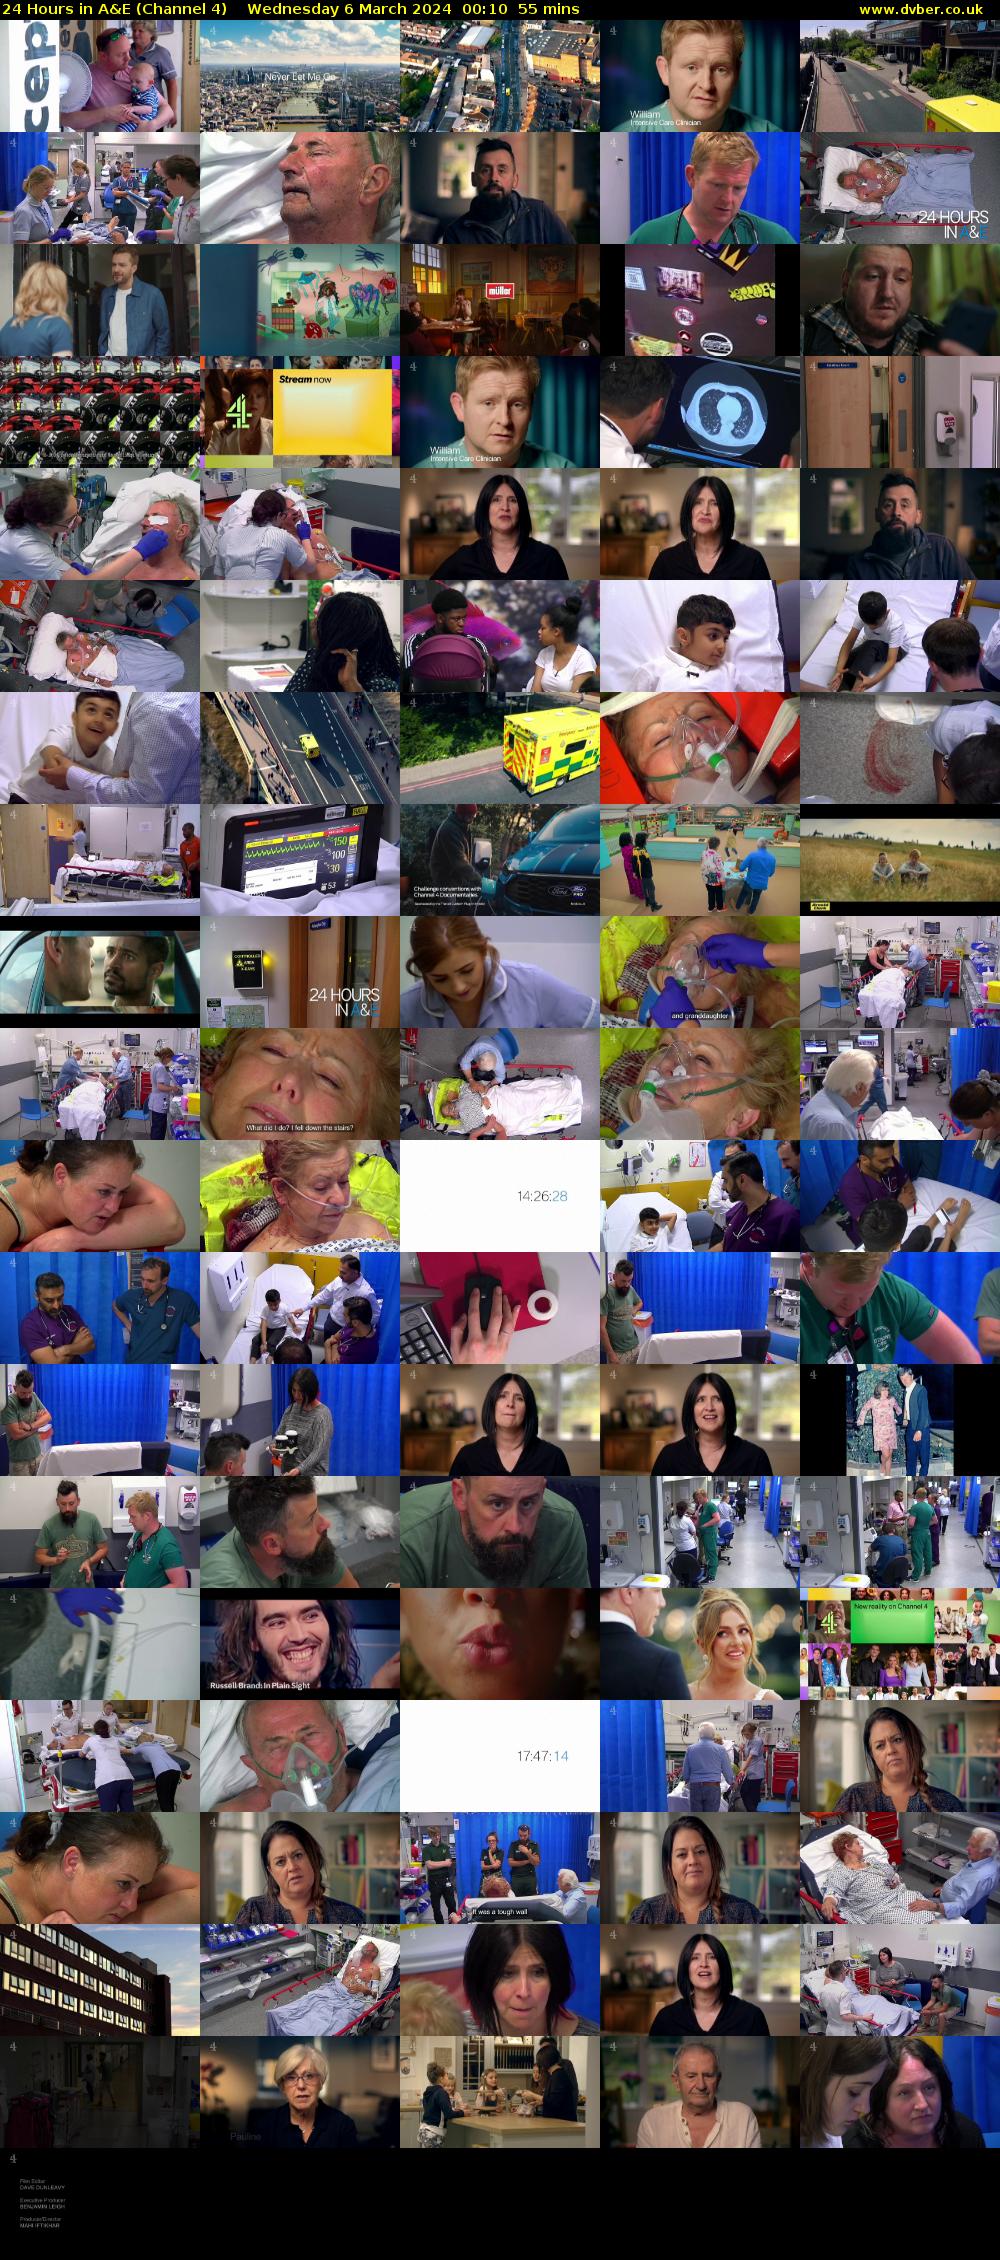 24 Hours in A&E (Channel 4) Wednesday 6 March 2024 00:10 - 01:05